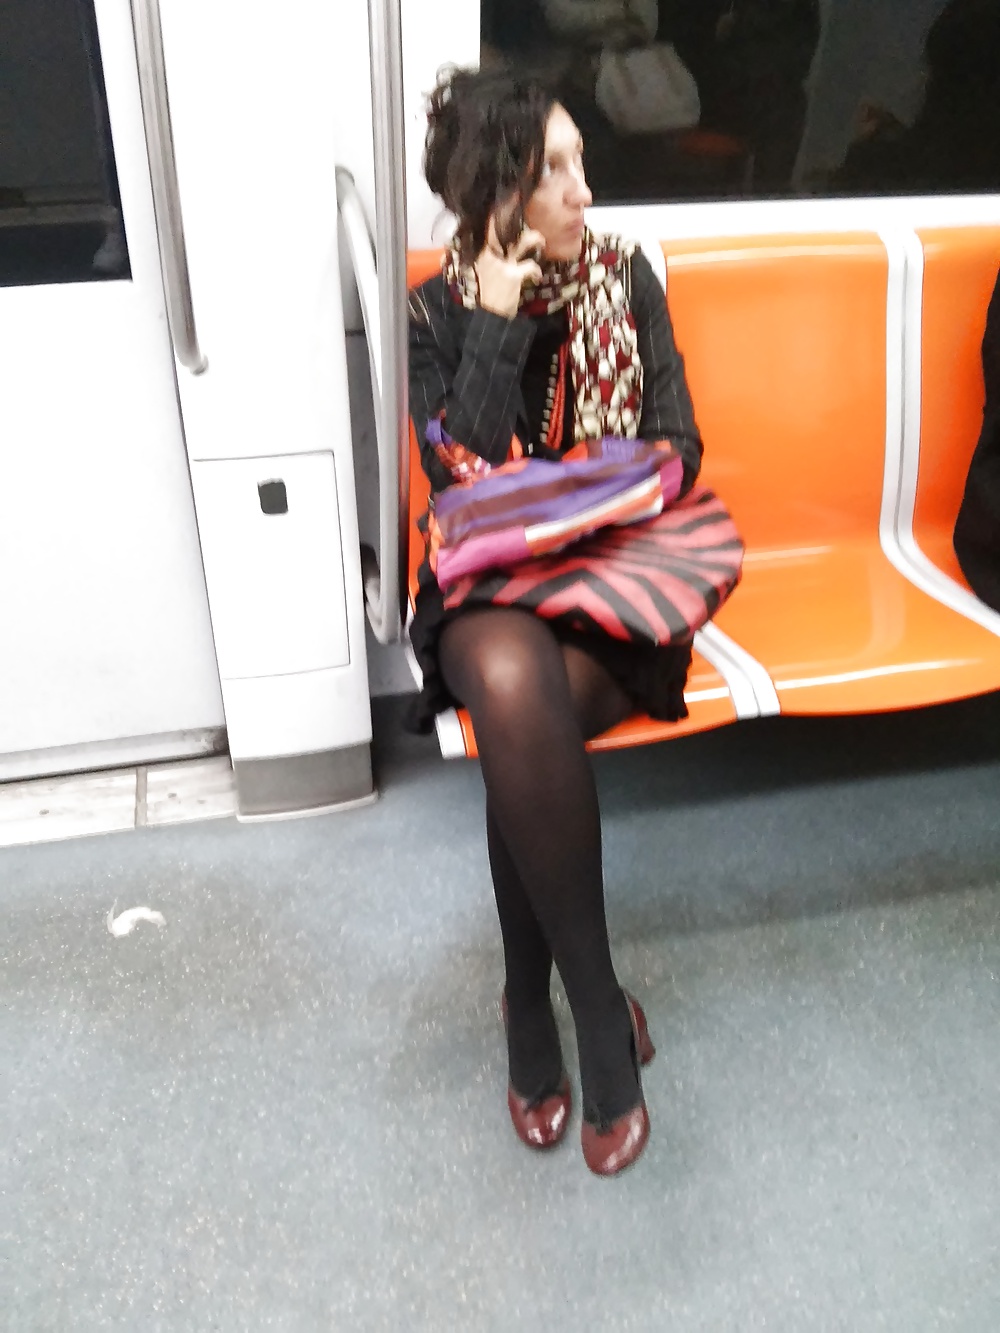 Italian (MILF) woman photographed in the subway (Italy) 2 #31402456